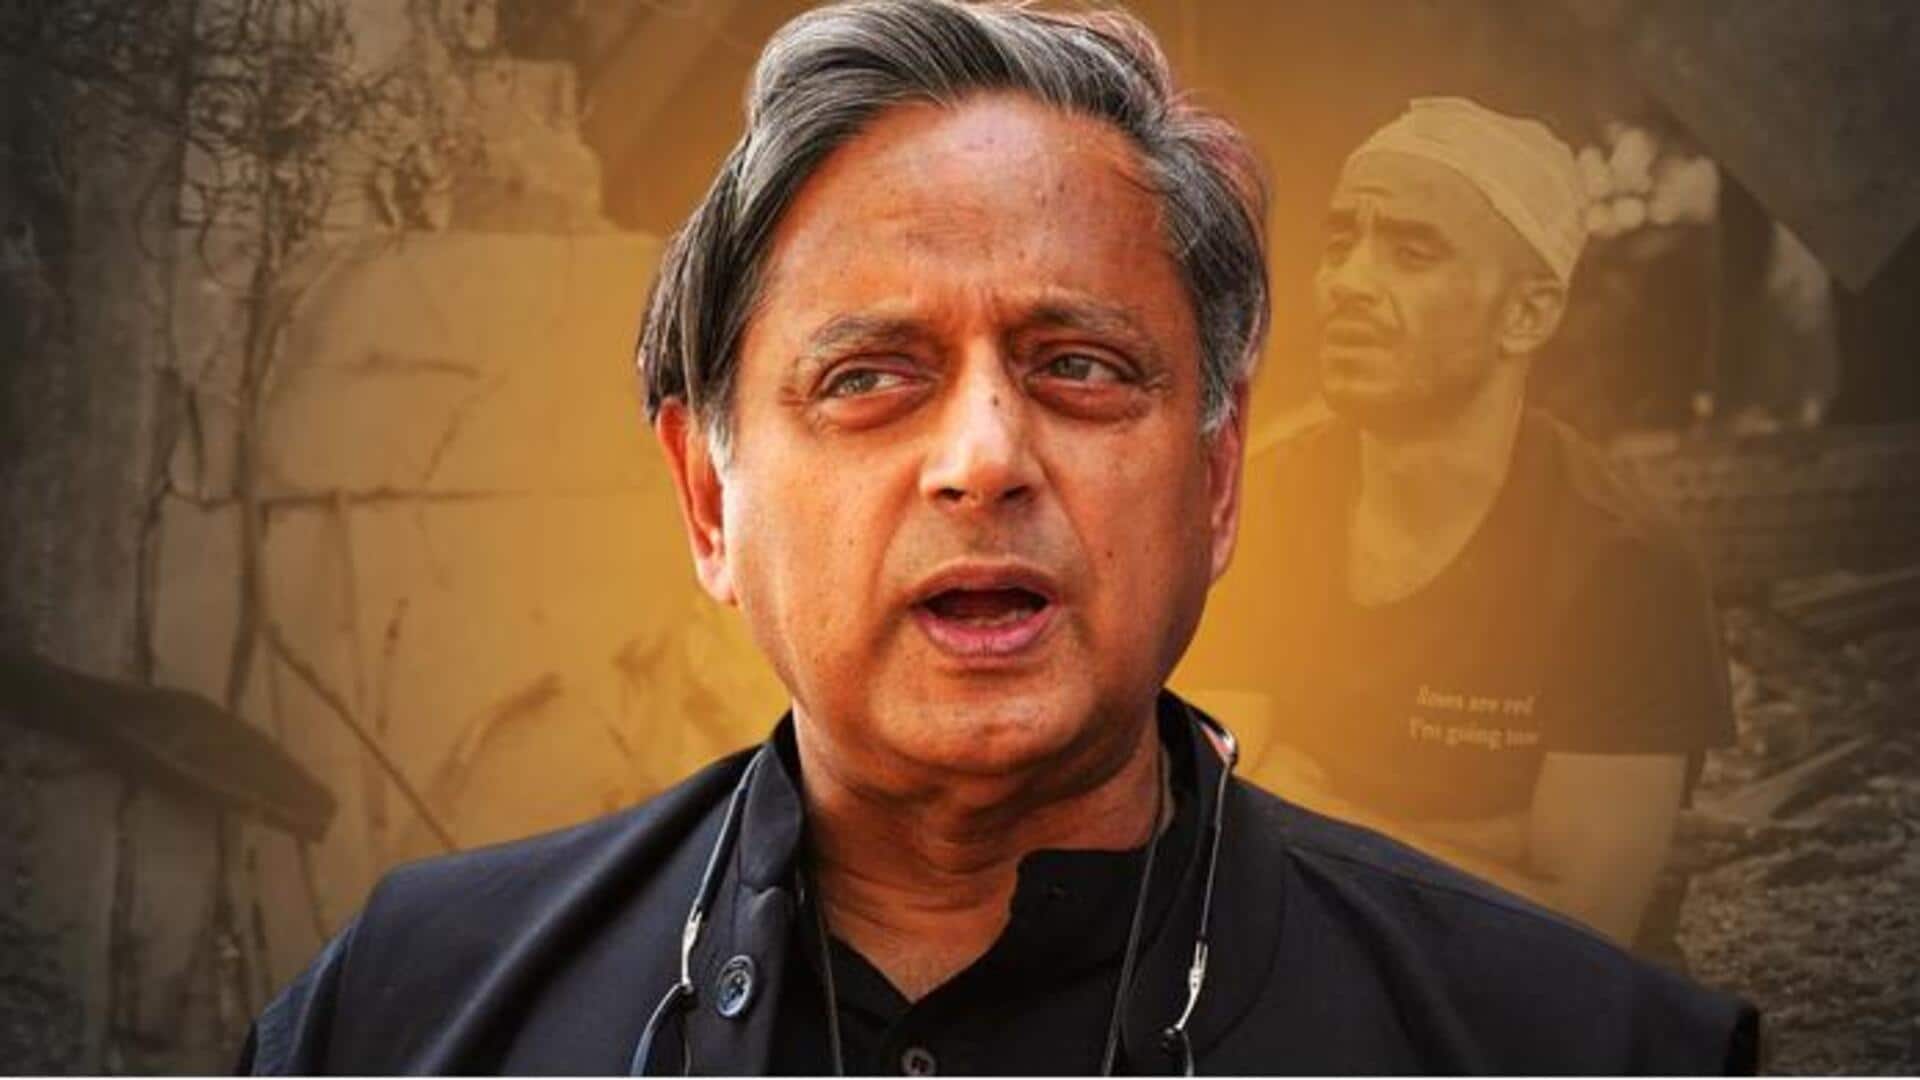 Shashi Tharoor removed from Palestine solidarity event